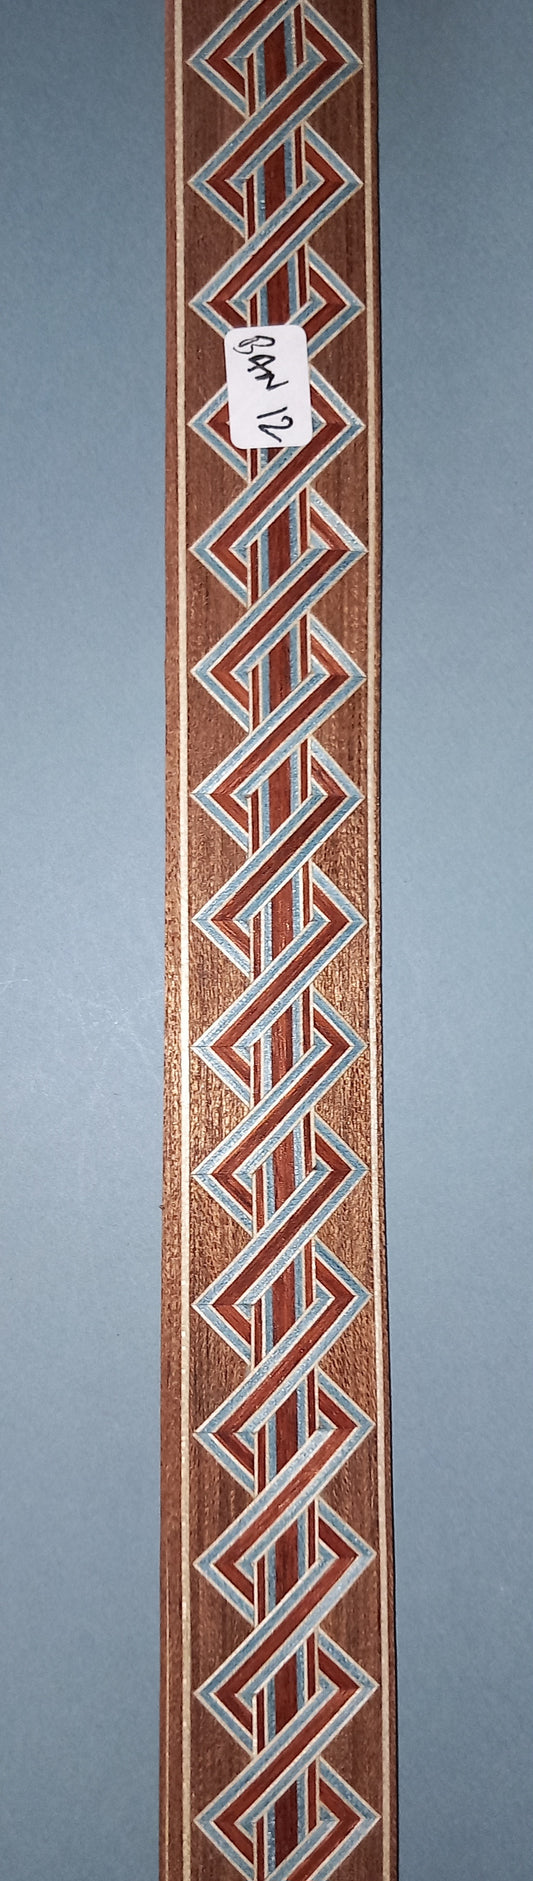 MARQUETRY INLAY BANDINGS 0.5MM THICK    31 X 100 CM